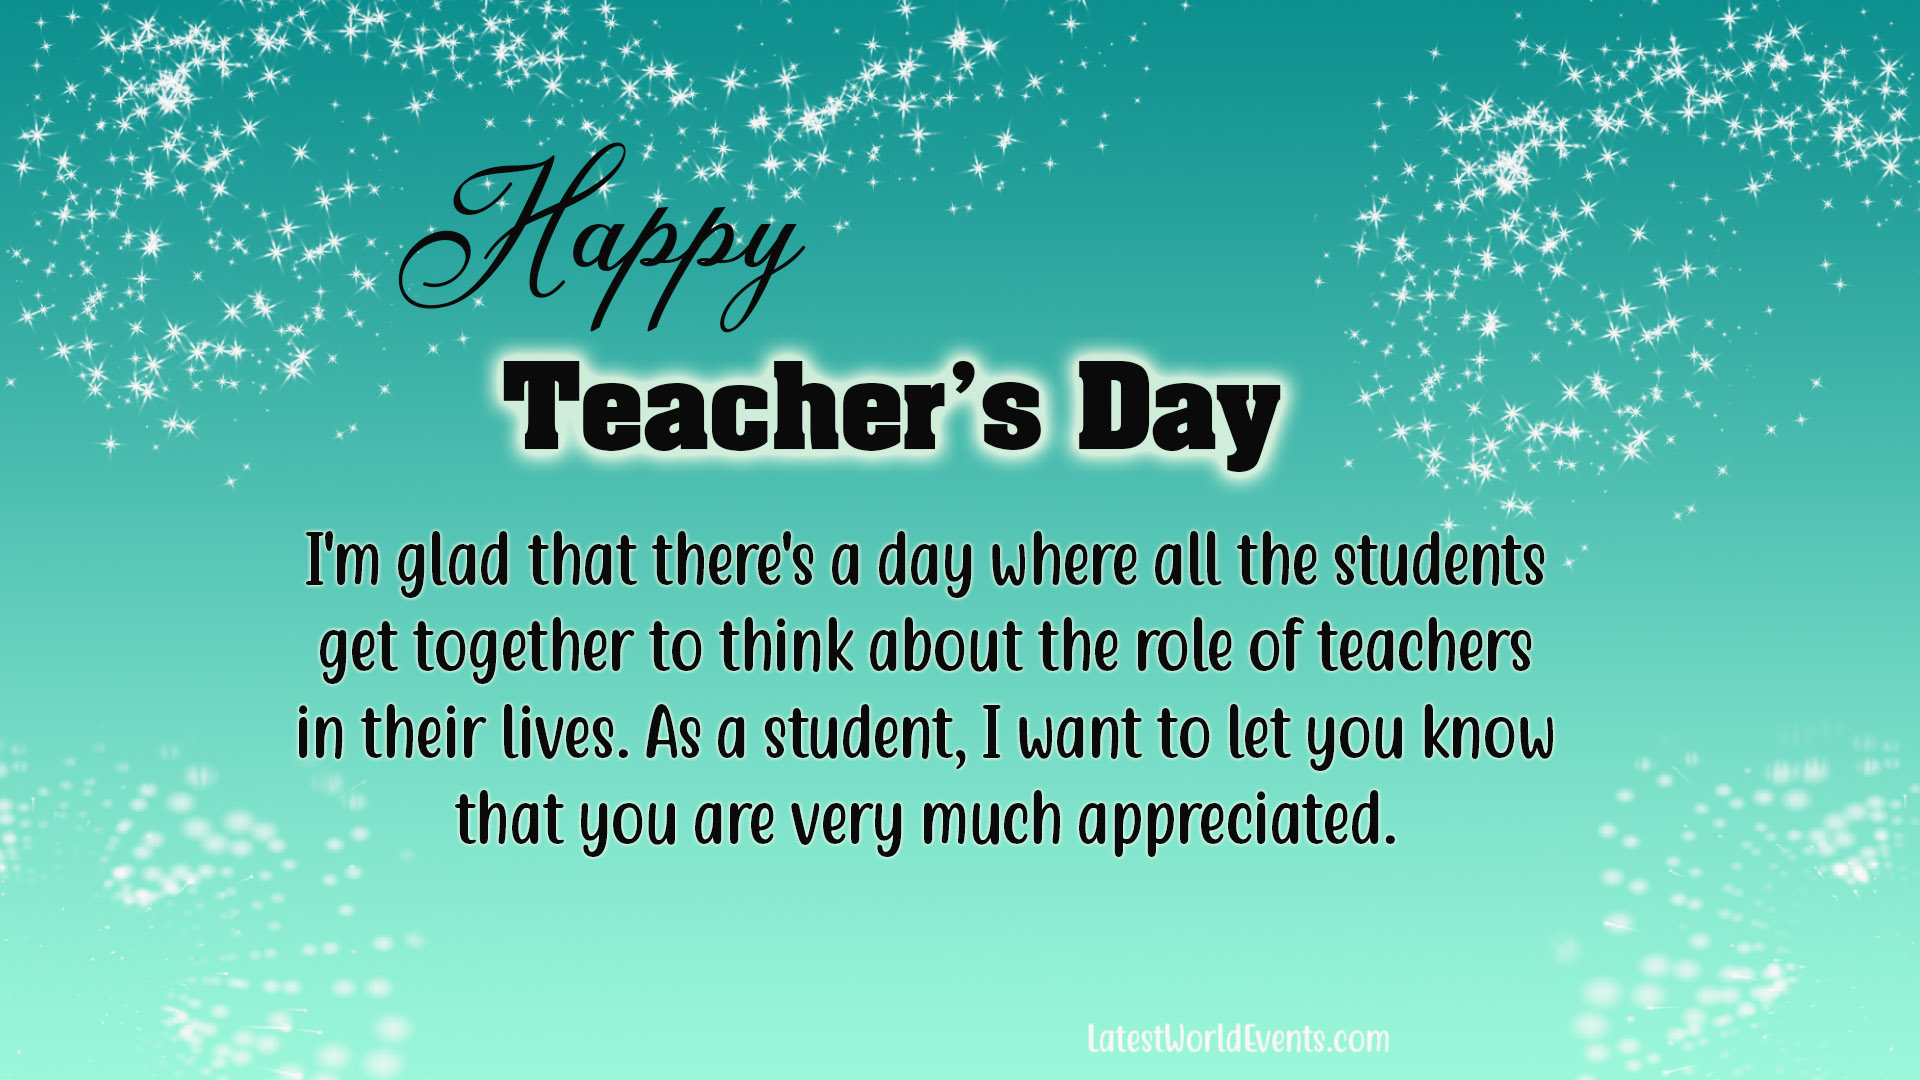 Inspirational message for teachers day